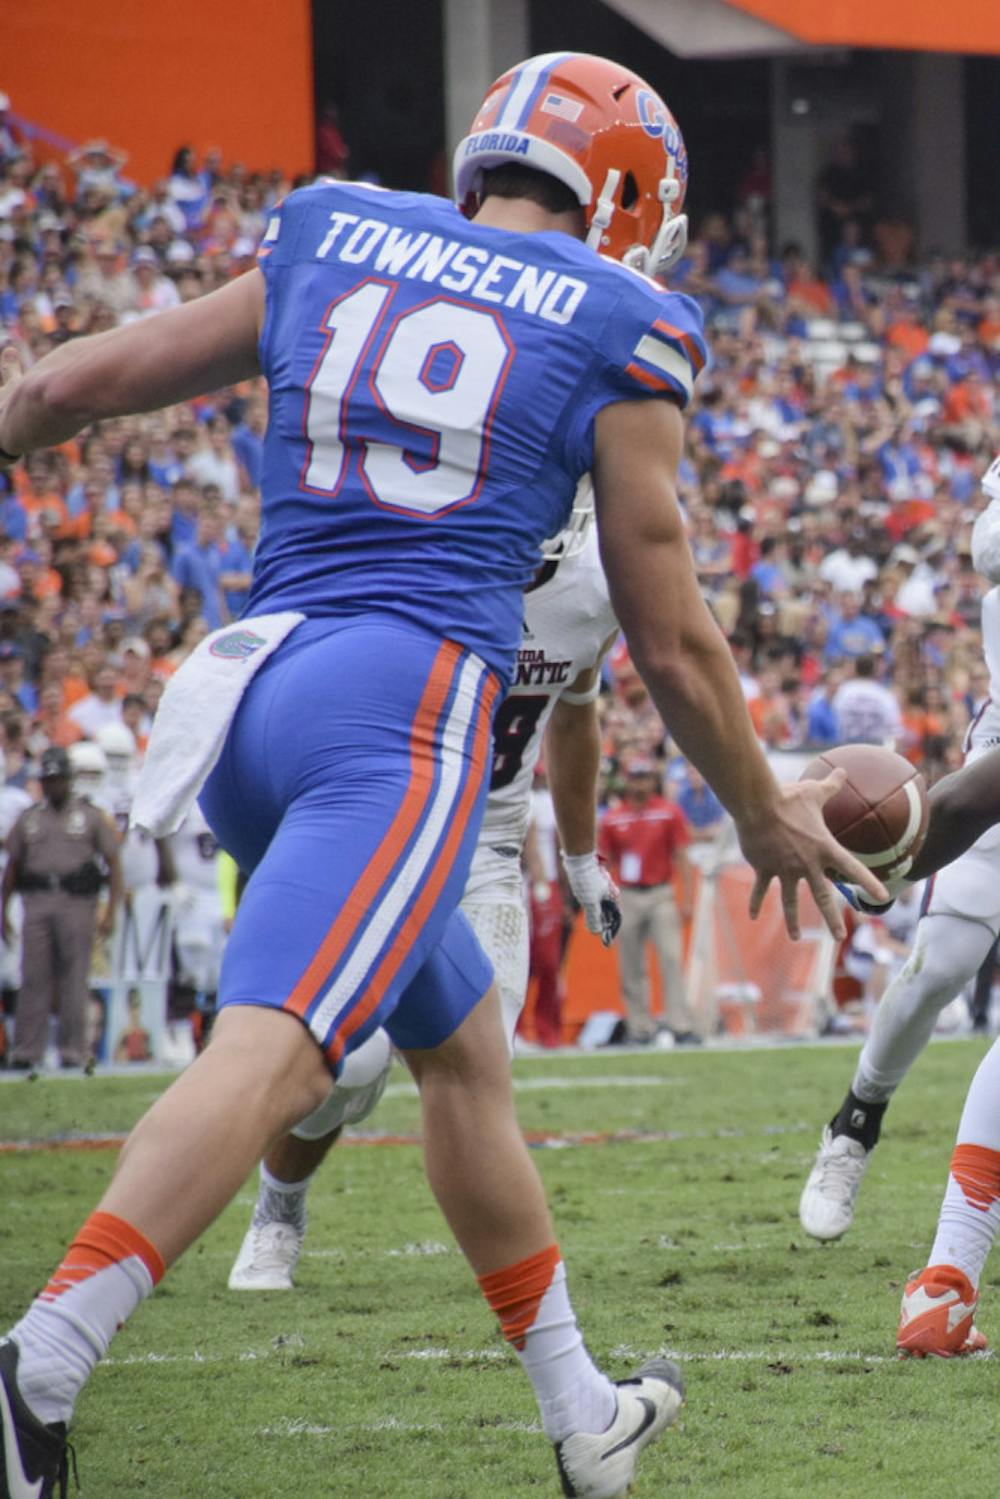 <p>Johnny Townsend punts during Florida's 20-14 overtime win against Florida Atlantic on Nov. 21, 2015, at Ben Hill Griffin Stadium.</p>